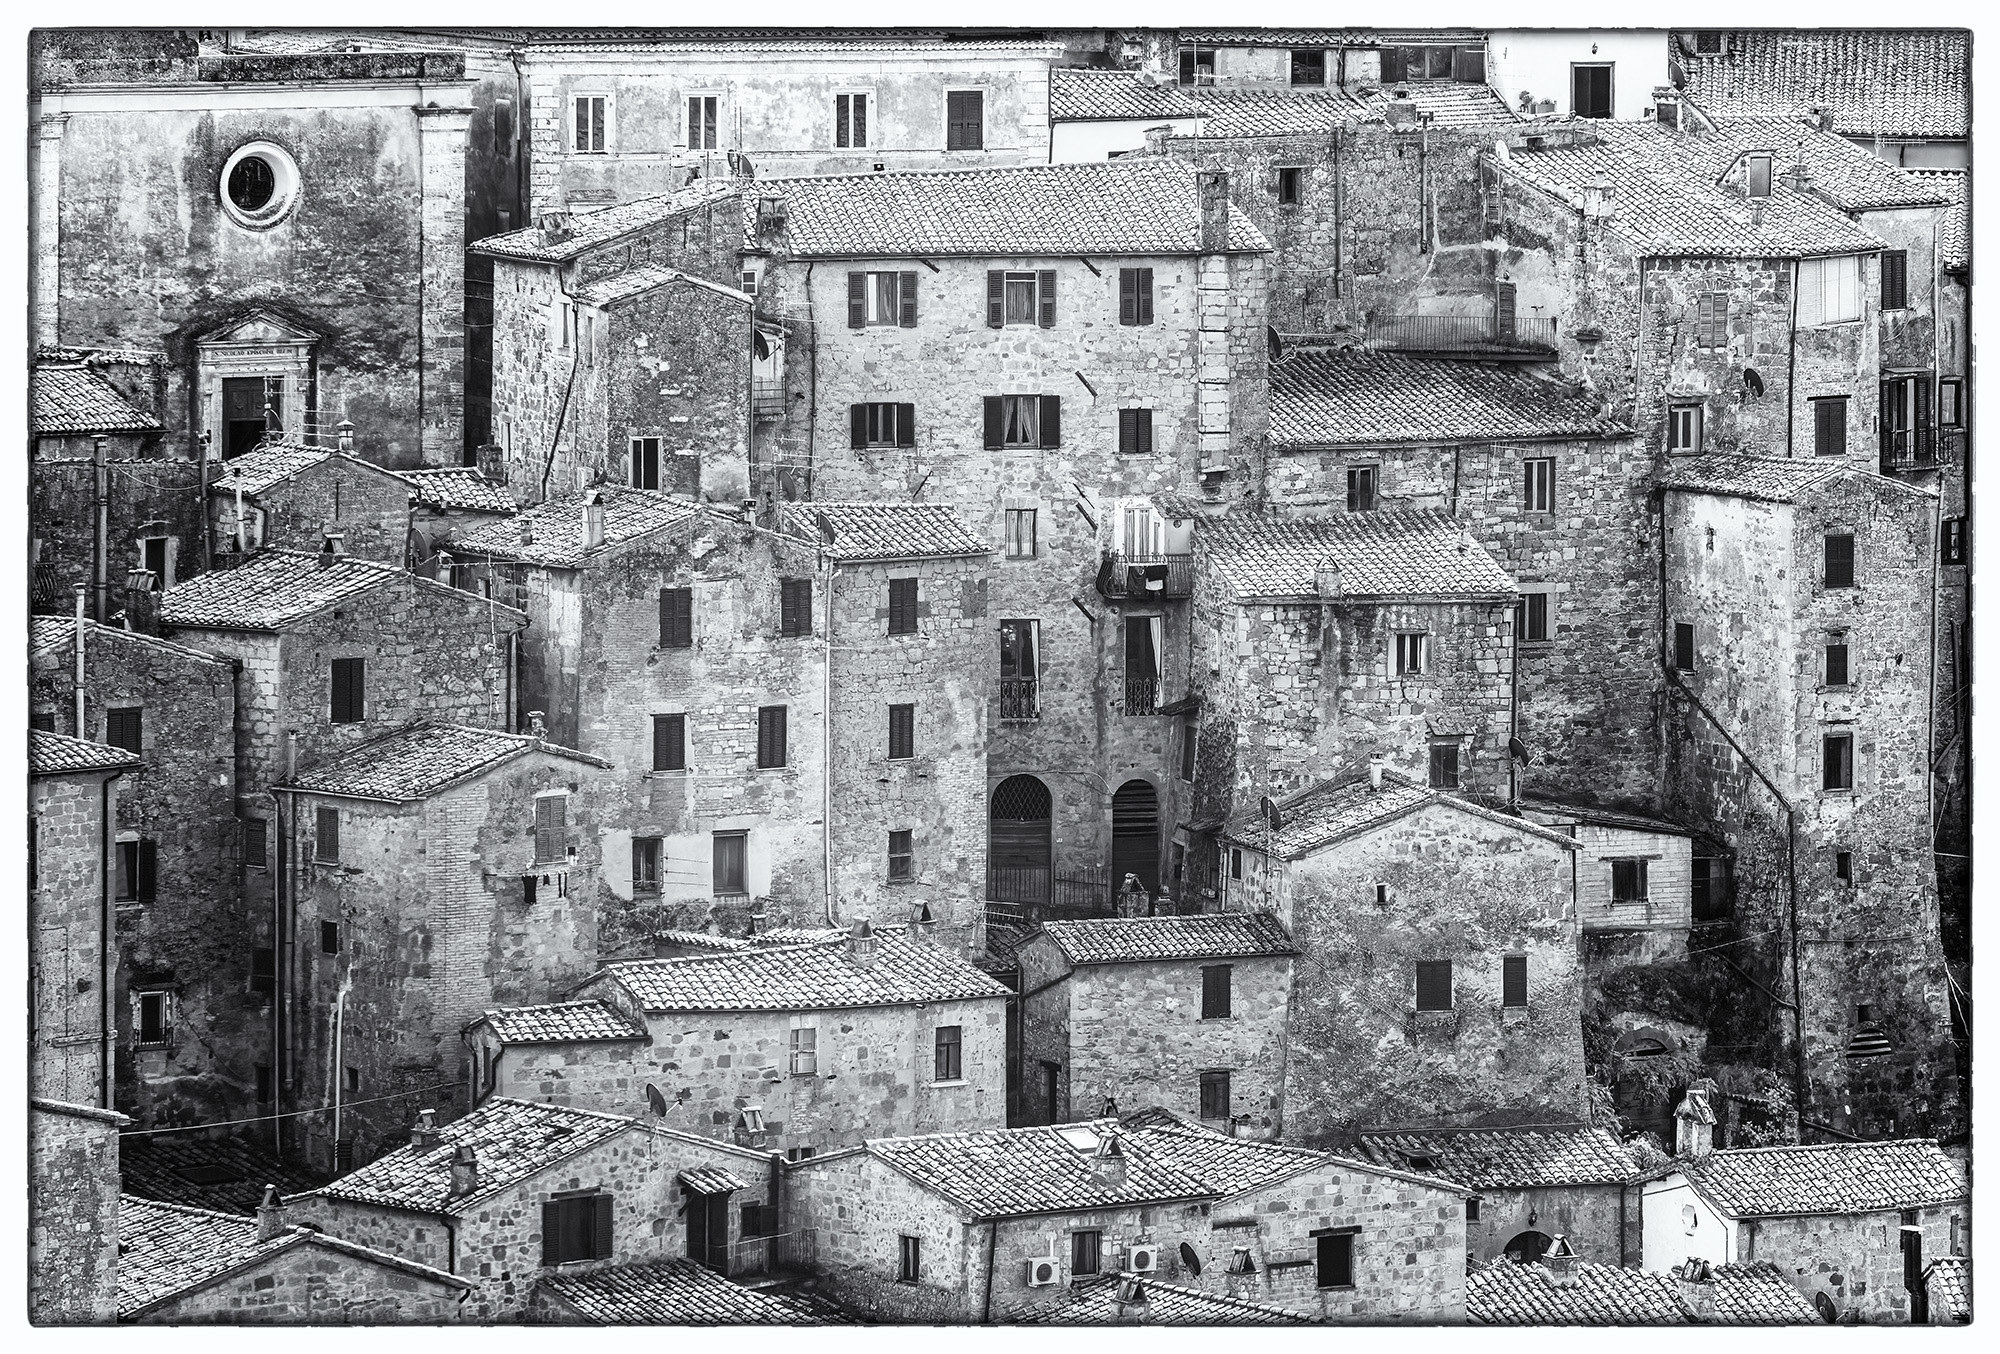 In this Black and White image, Pitigliano, Tuscany, Italy, reveals its medieval charm. This photo, devoid of sky, portrays a...